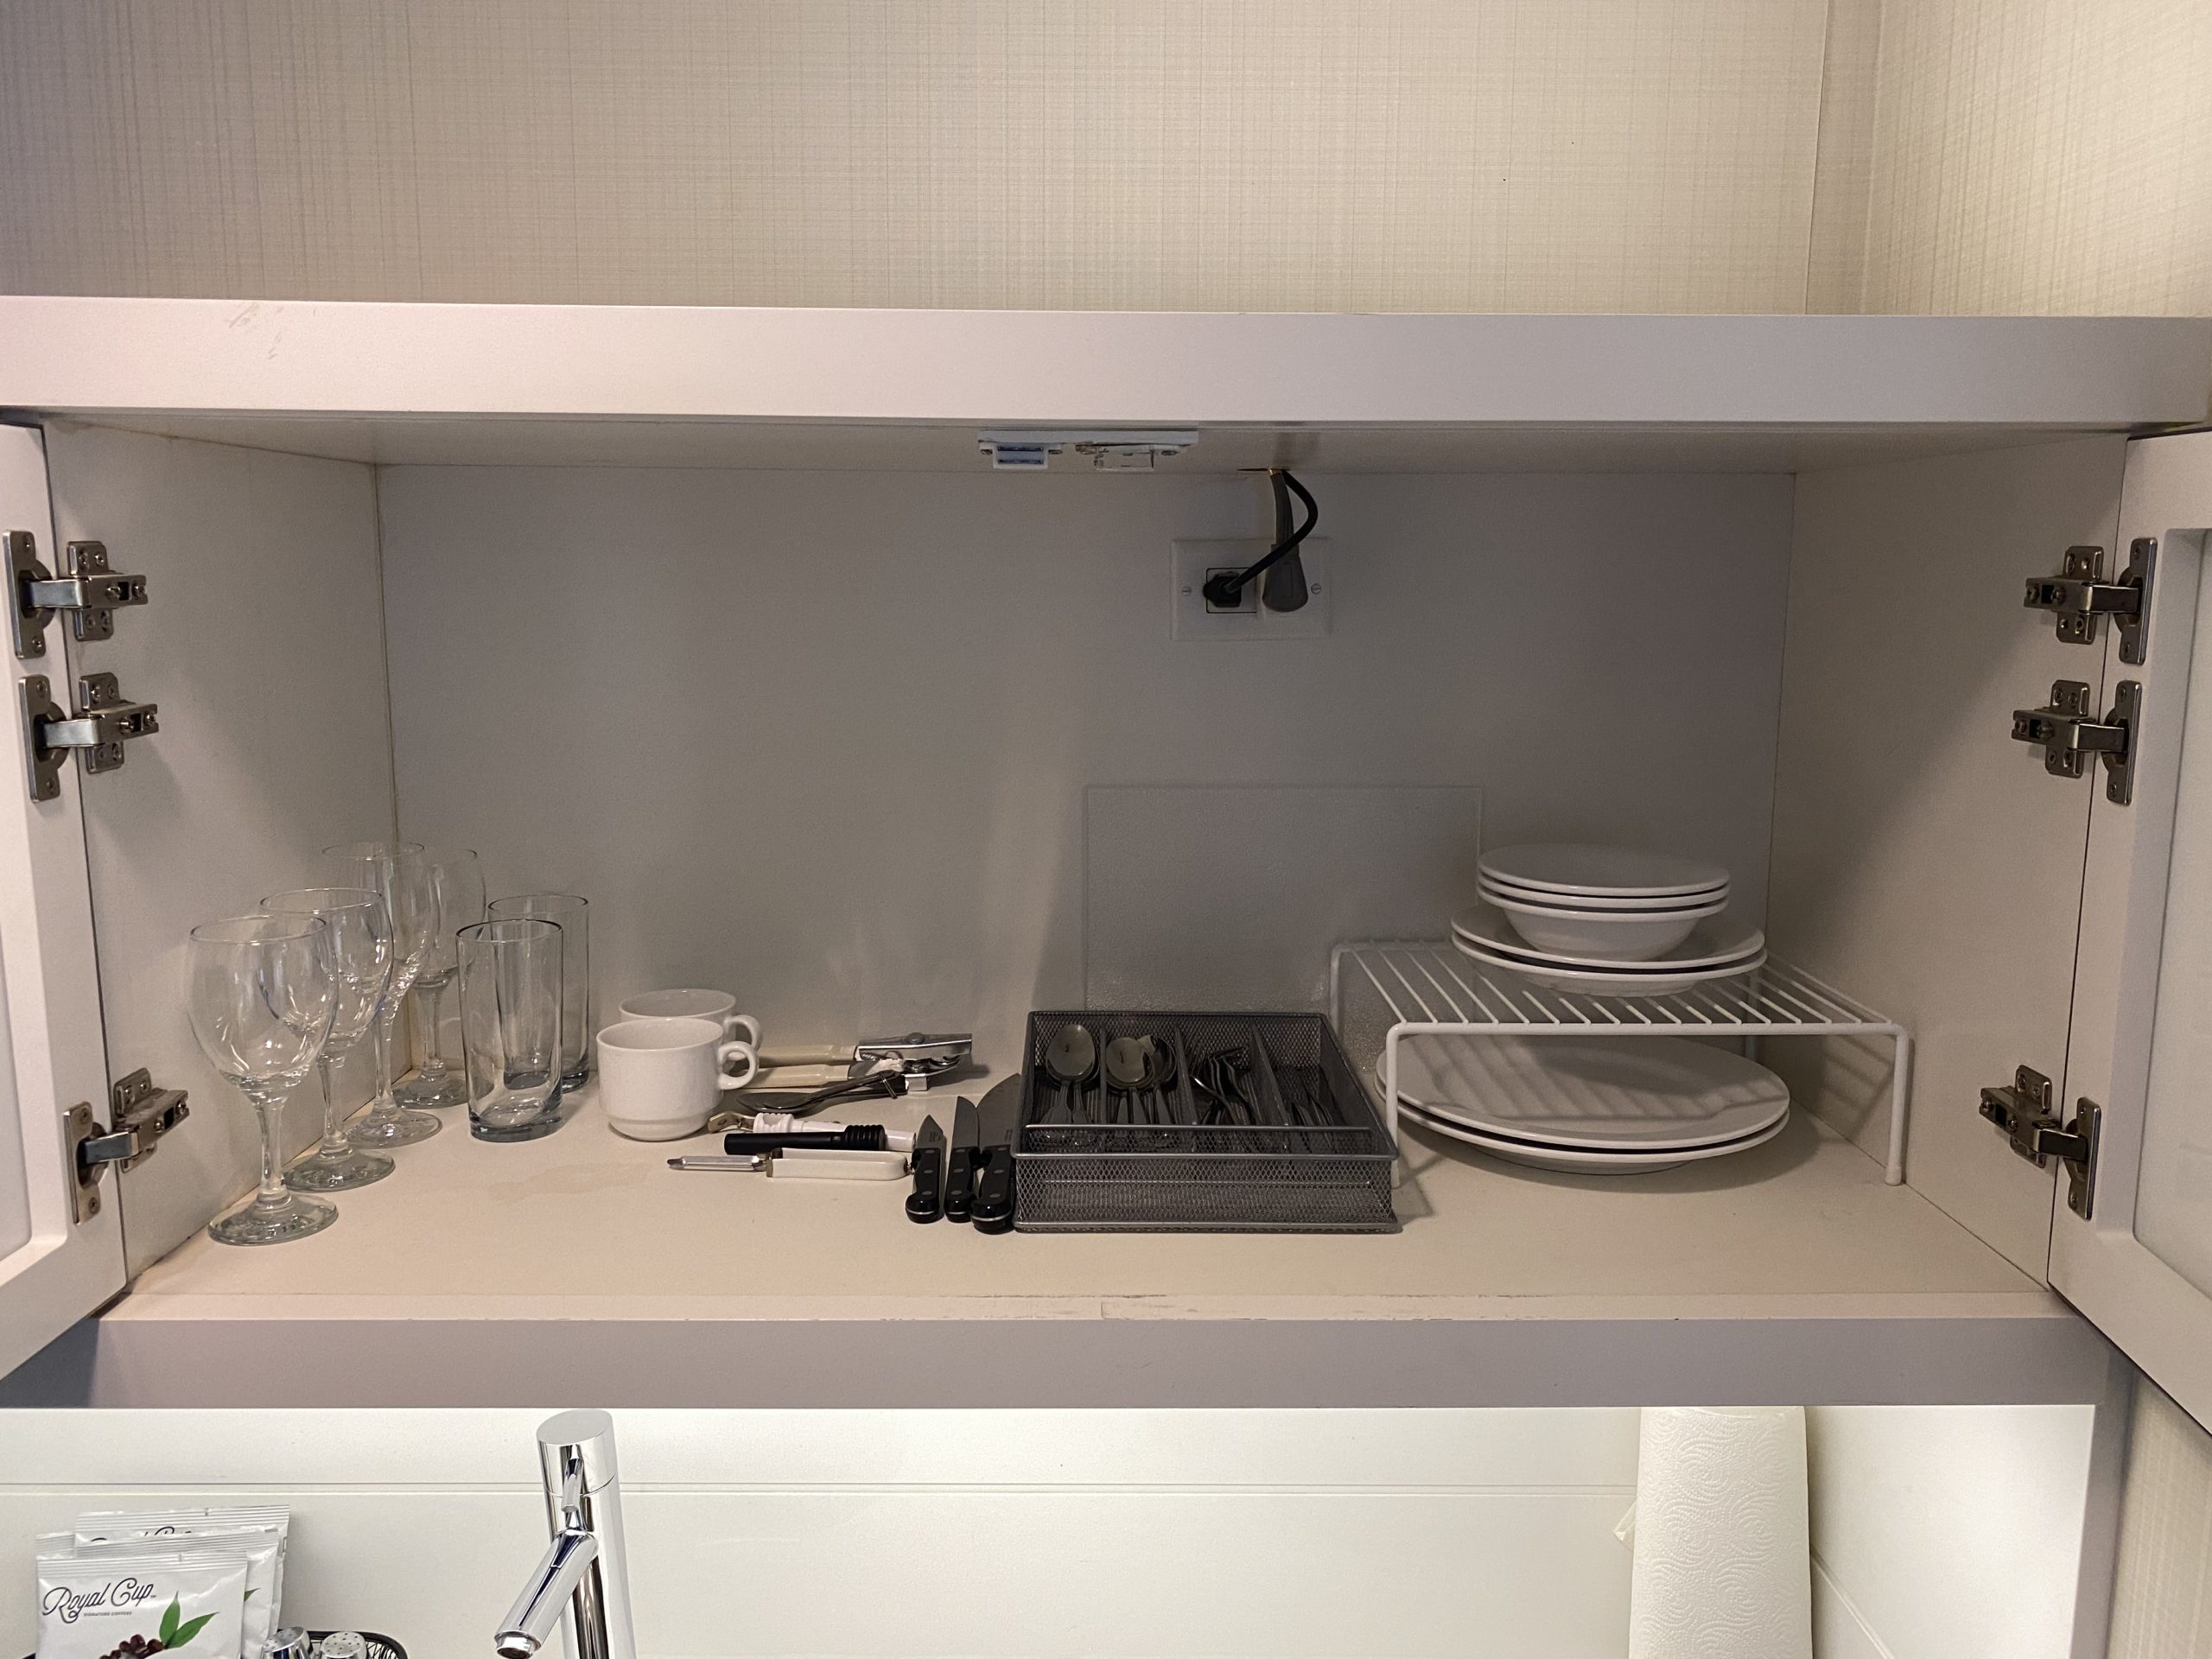 a shelf with dishes and glasses